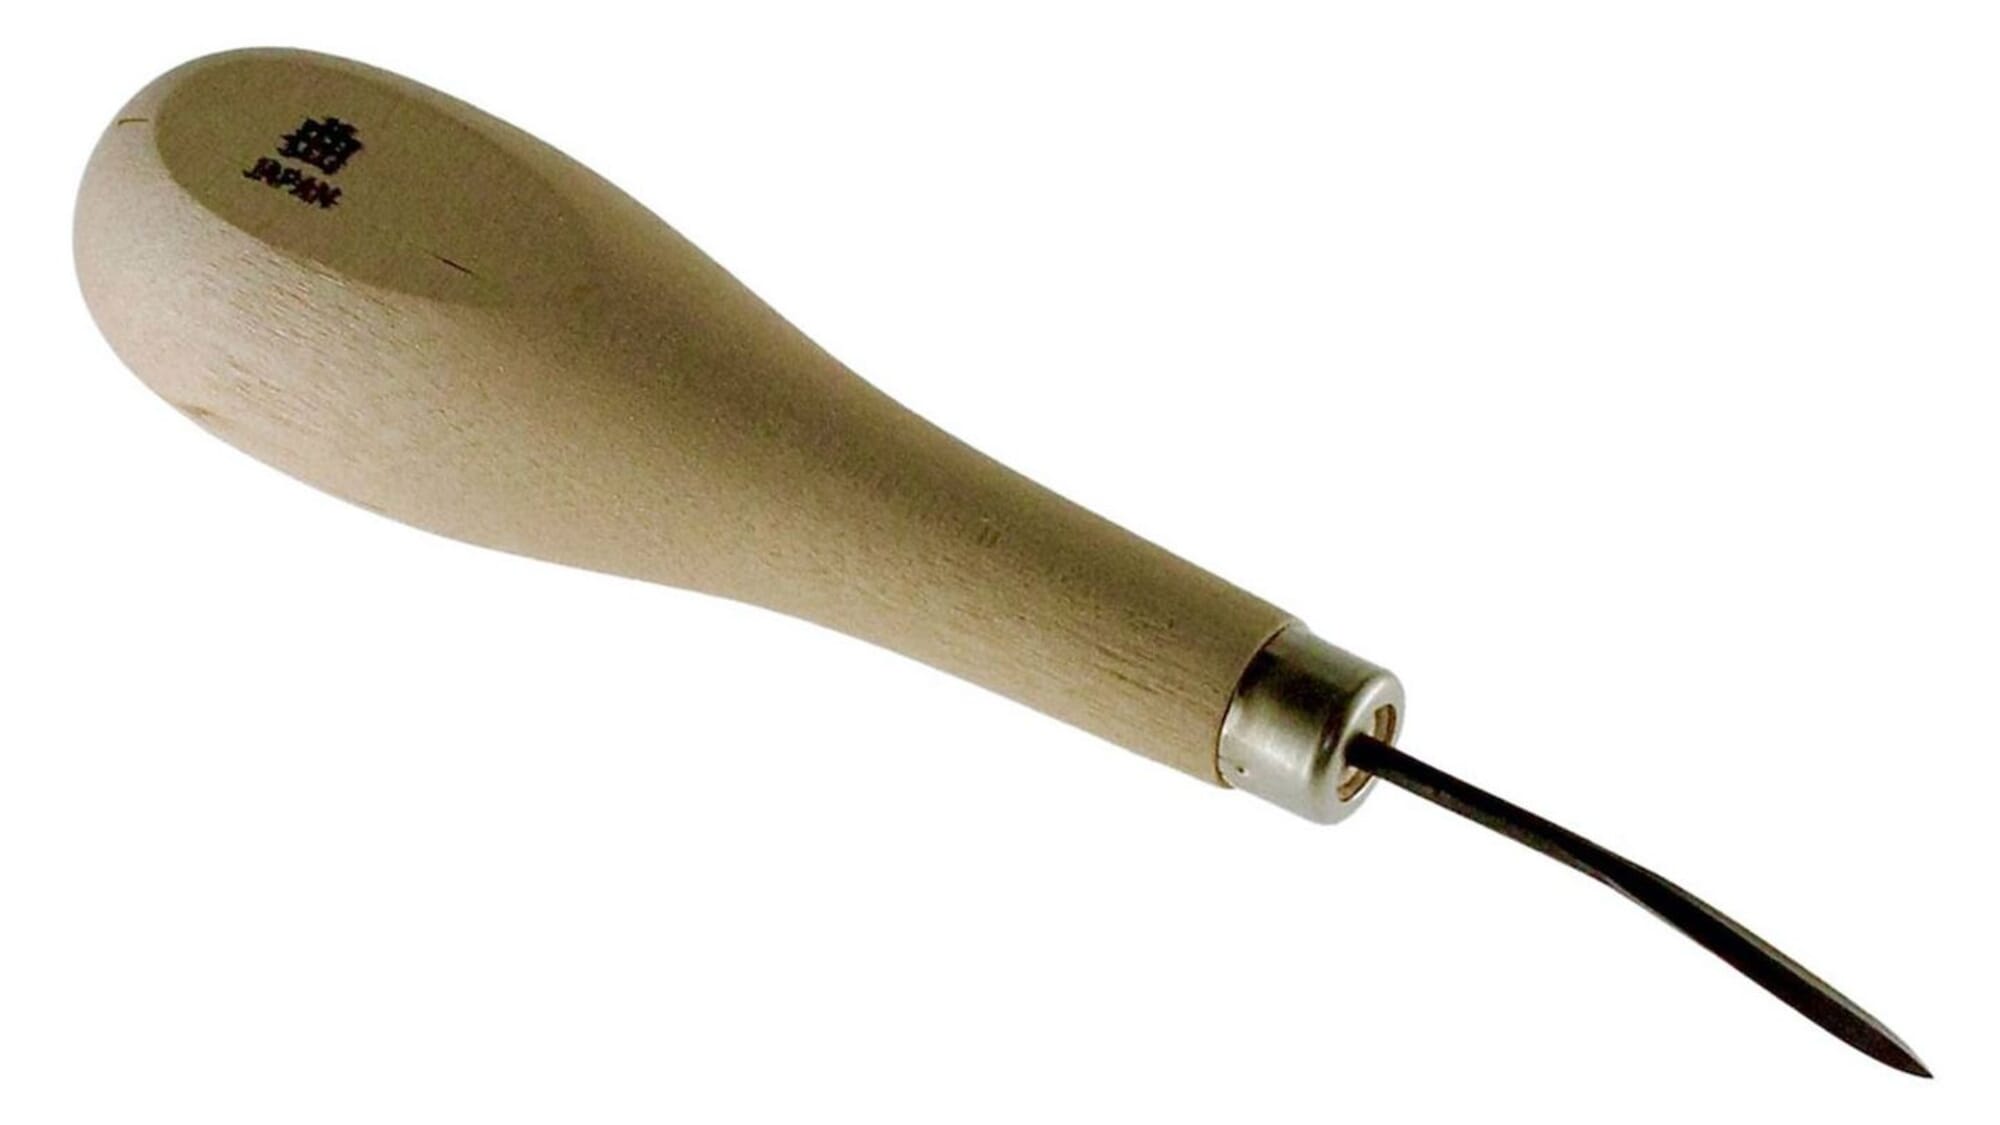 Seiwa Leathercraft Hand Sewing Tool Curved Diamond Point Stitching Awl, with Wooden Handle, for Punching Stitch Holes in Leatherwork